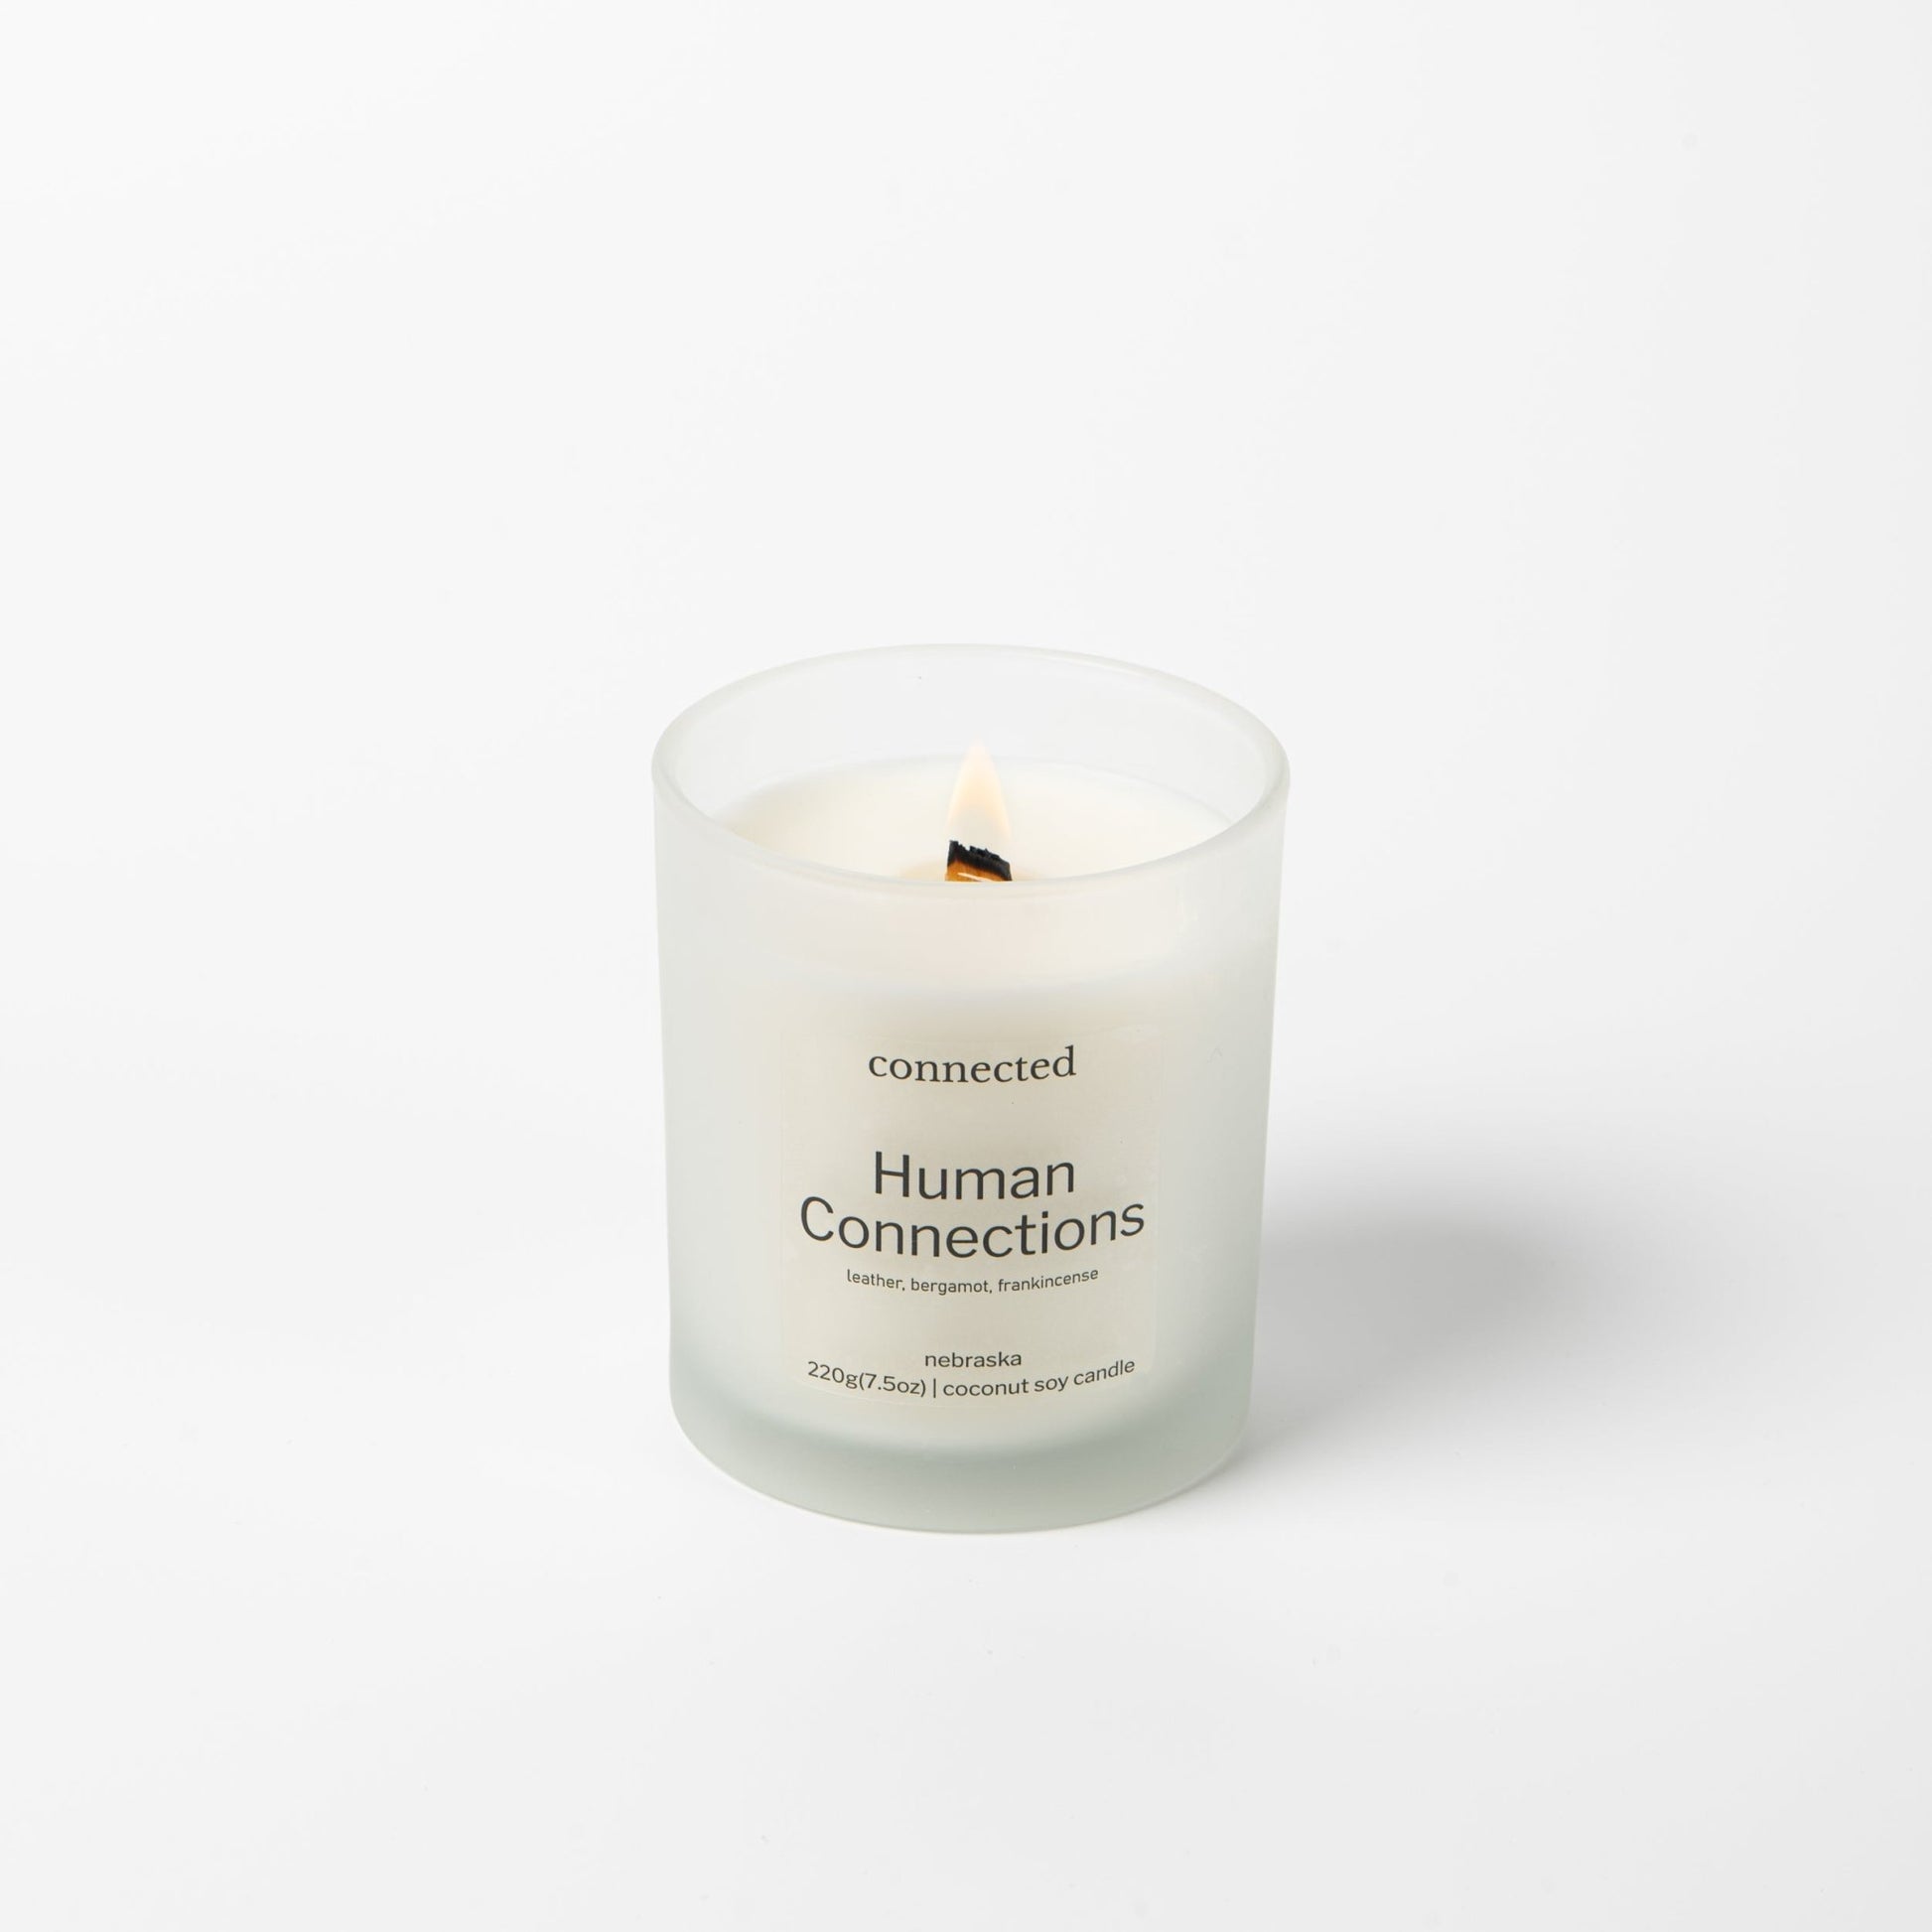 Human Connections -Coconut soy candle - Connected Fragrance Company - Connected